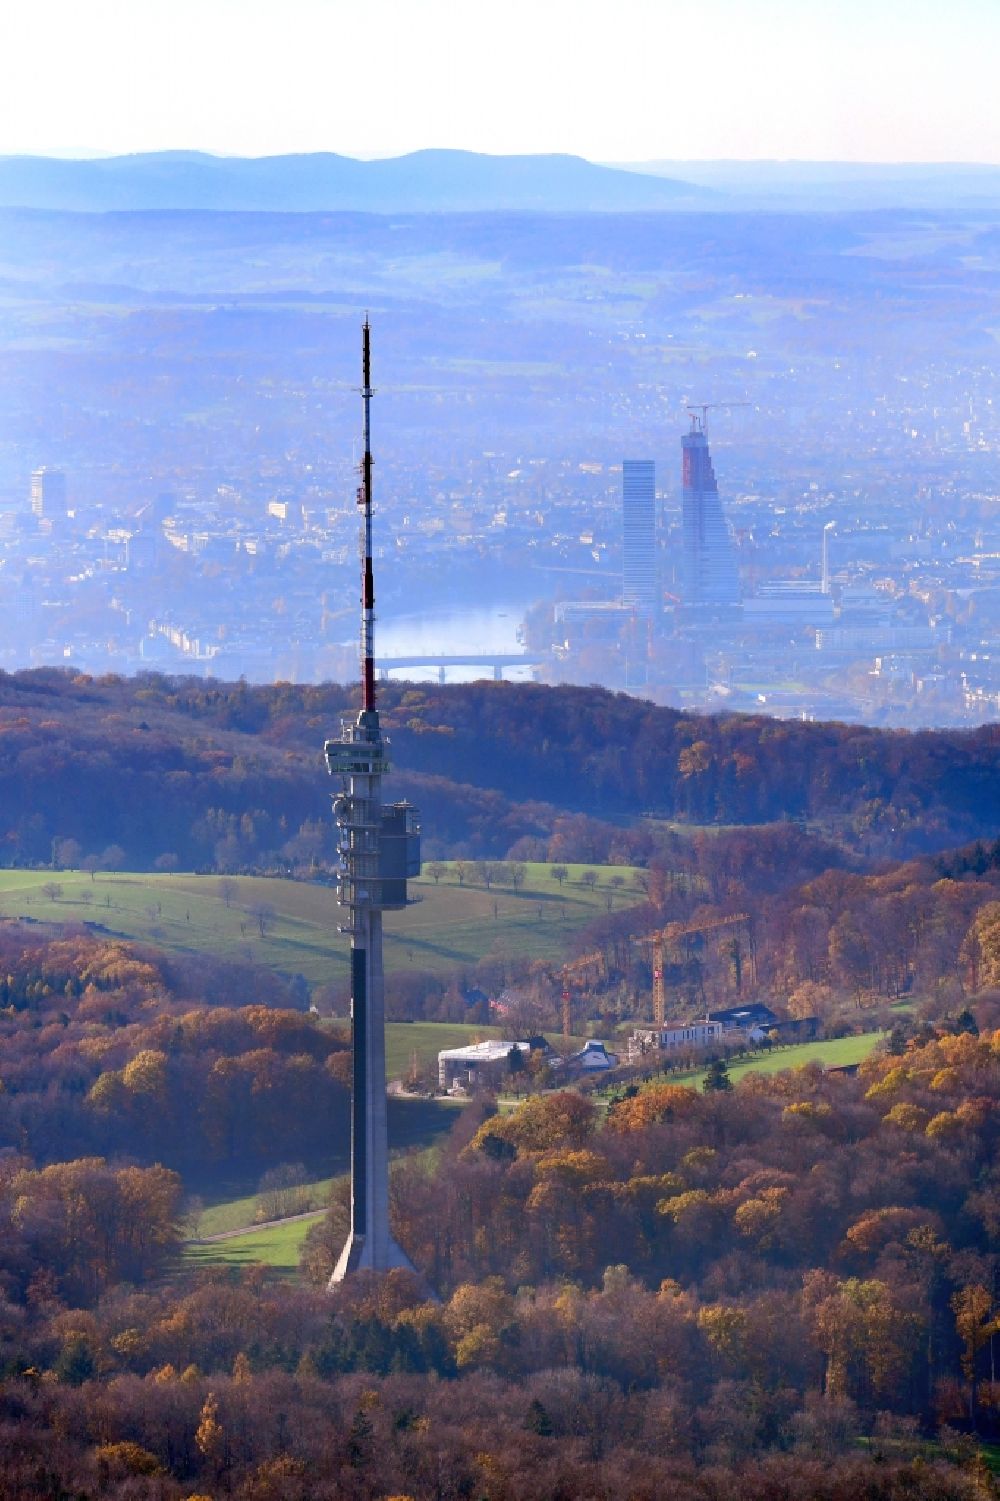 Bettingen from the bird's eye view: Weather with layered haze at St. Chrischona television tower on Hohestrasse in Bettingen in the canton Basel, Switzerland. Looking to the skyline of Basle